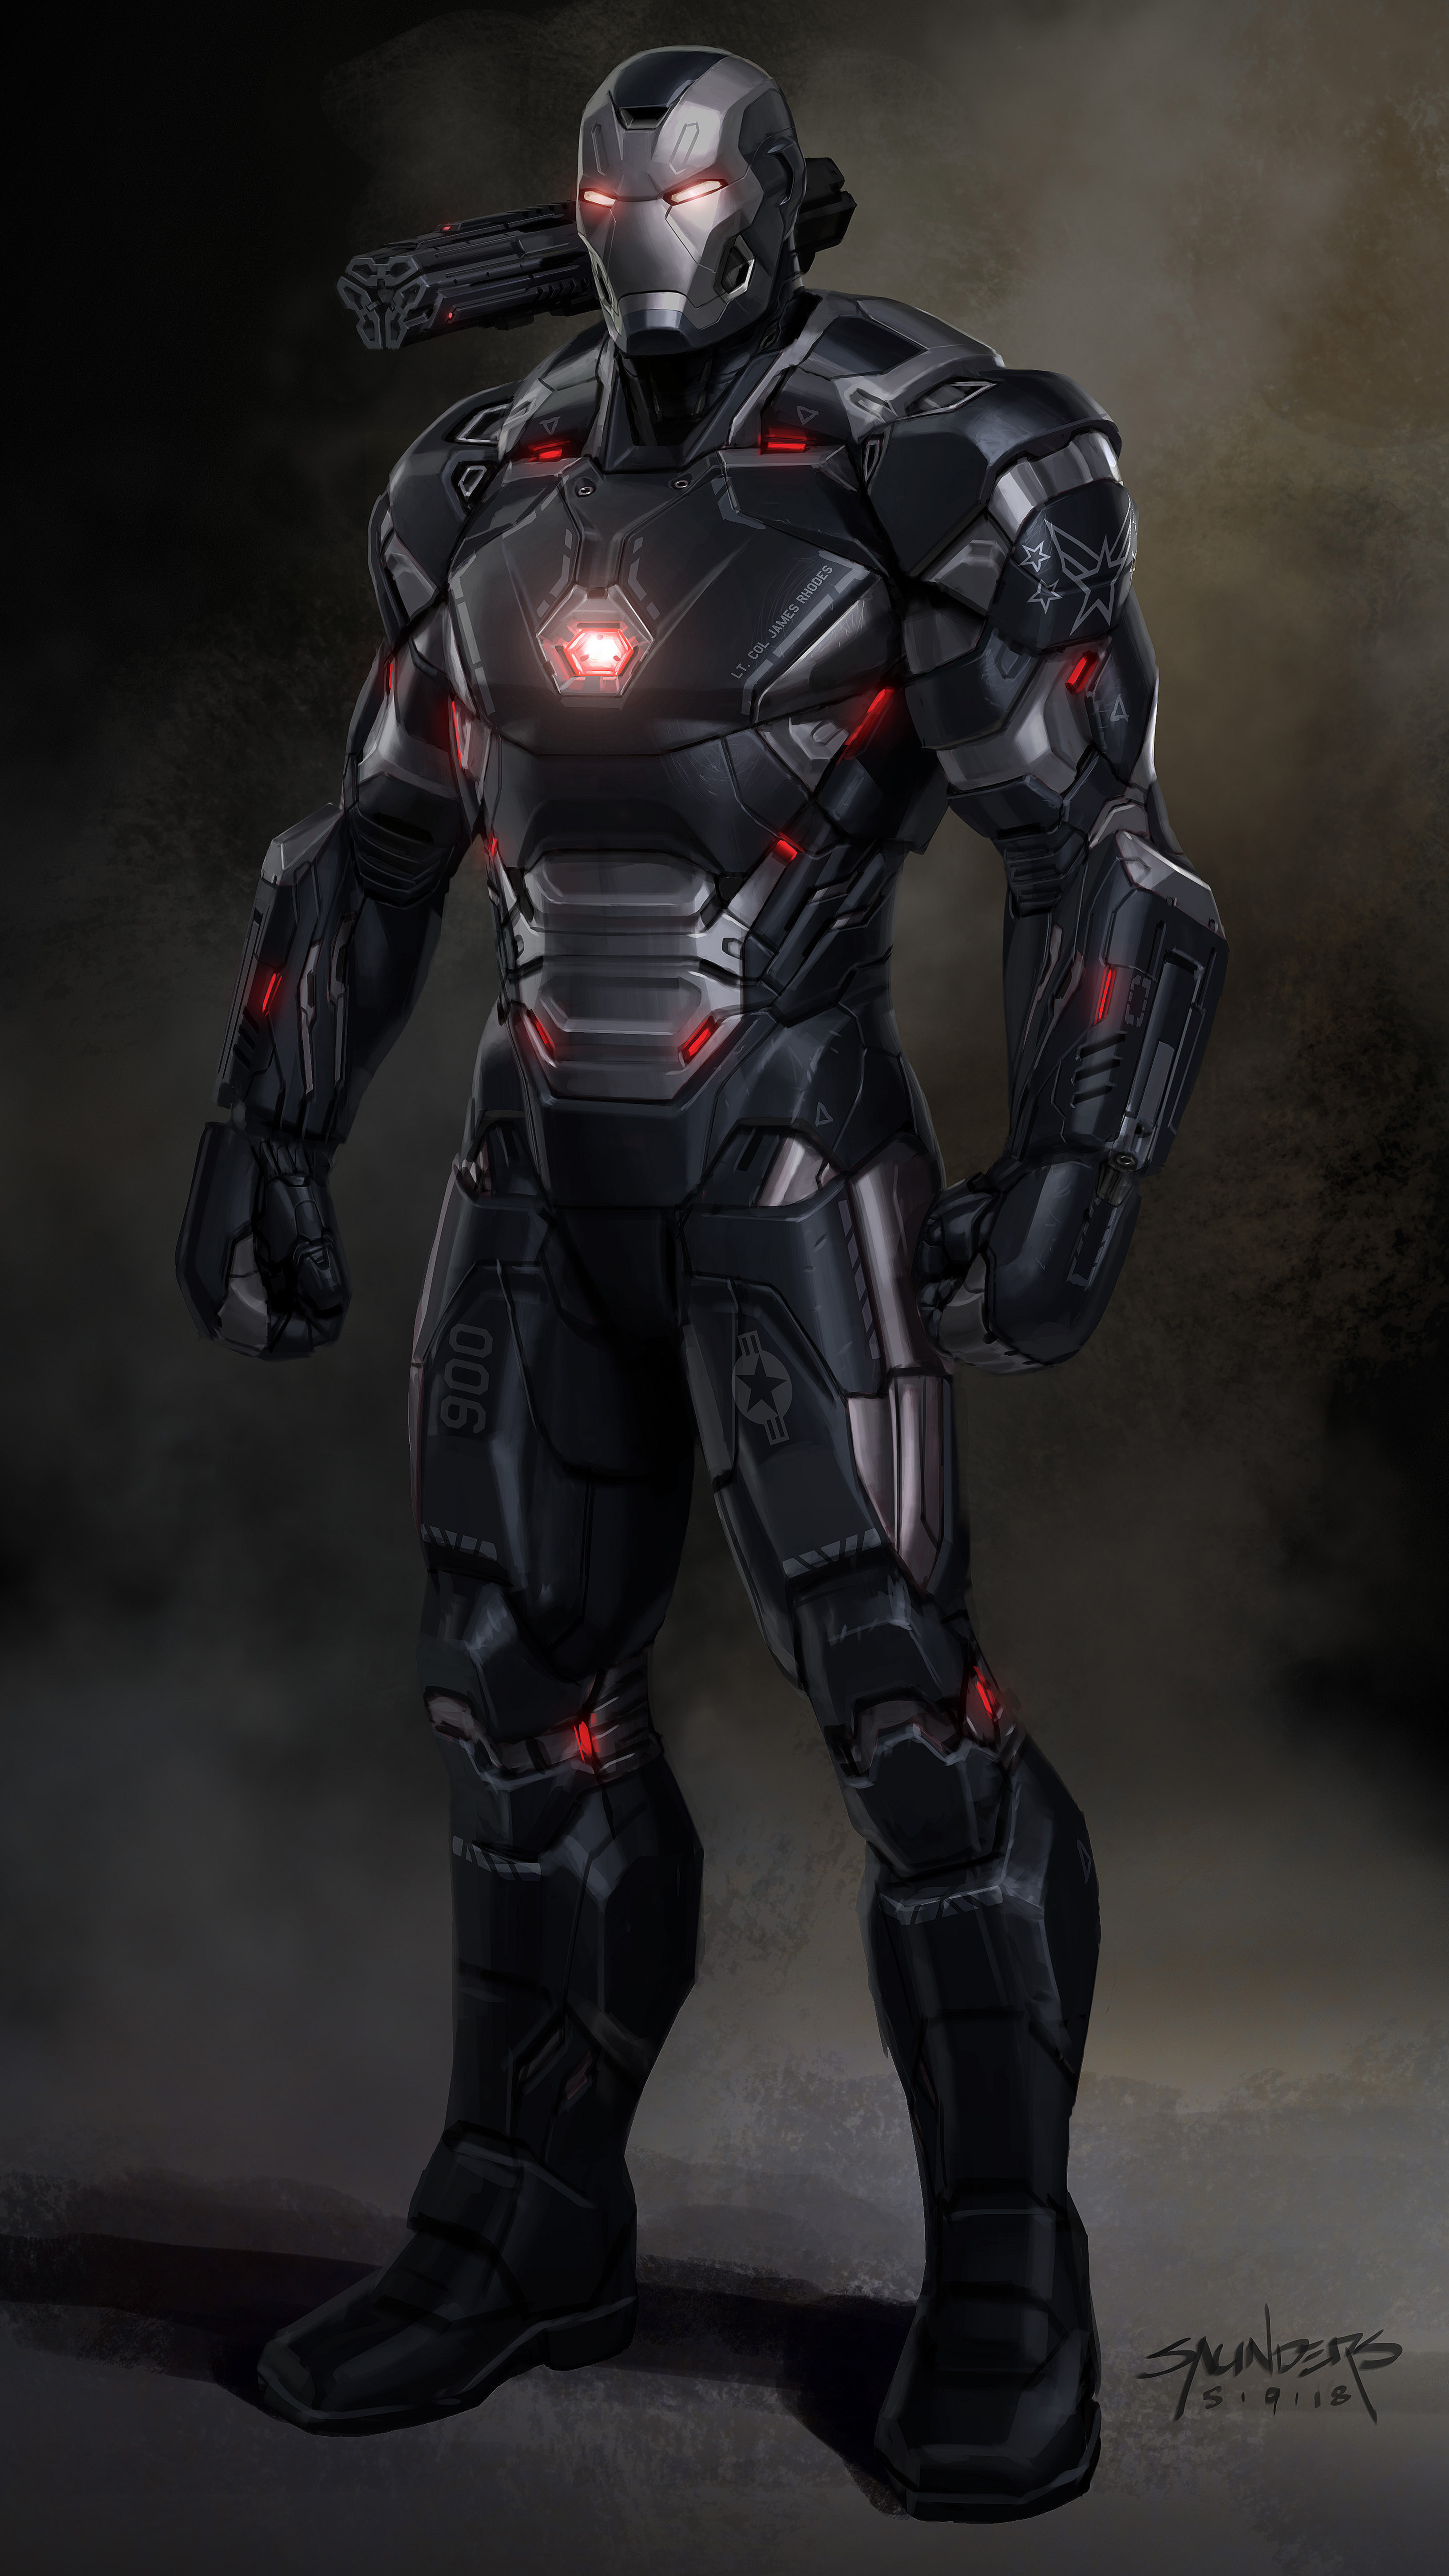 Given the lack of time, I searched for earlier work I could quickly adapt. One of my alternate designs for Iron Man Mk 46 had very War Machine-like forms, so I reworked it into this proposal. 